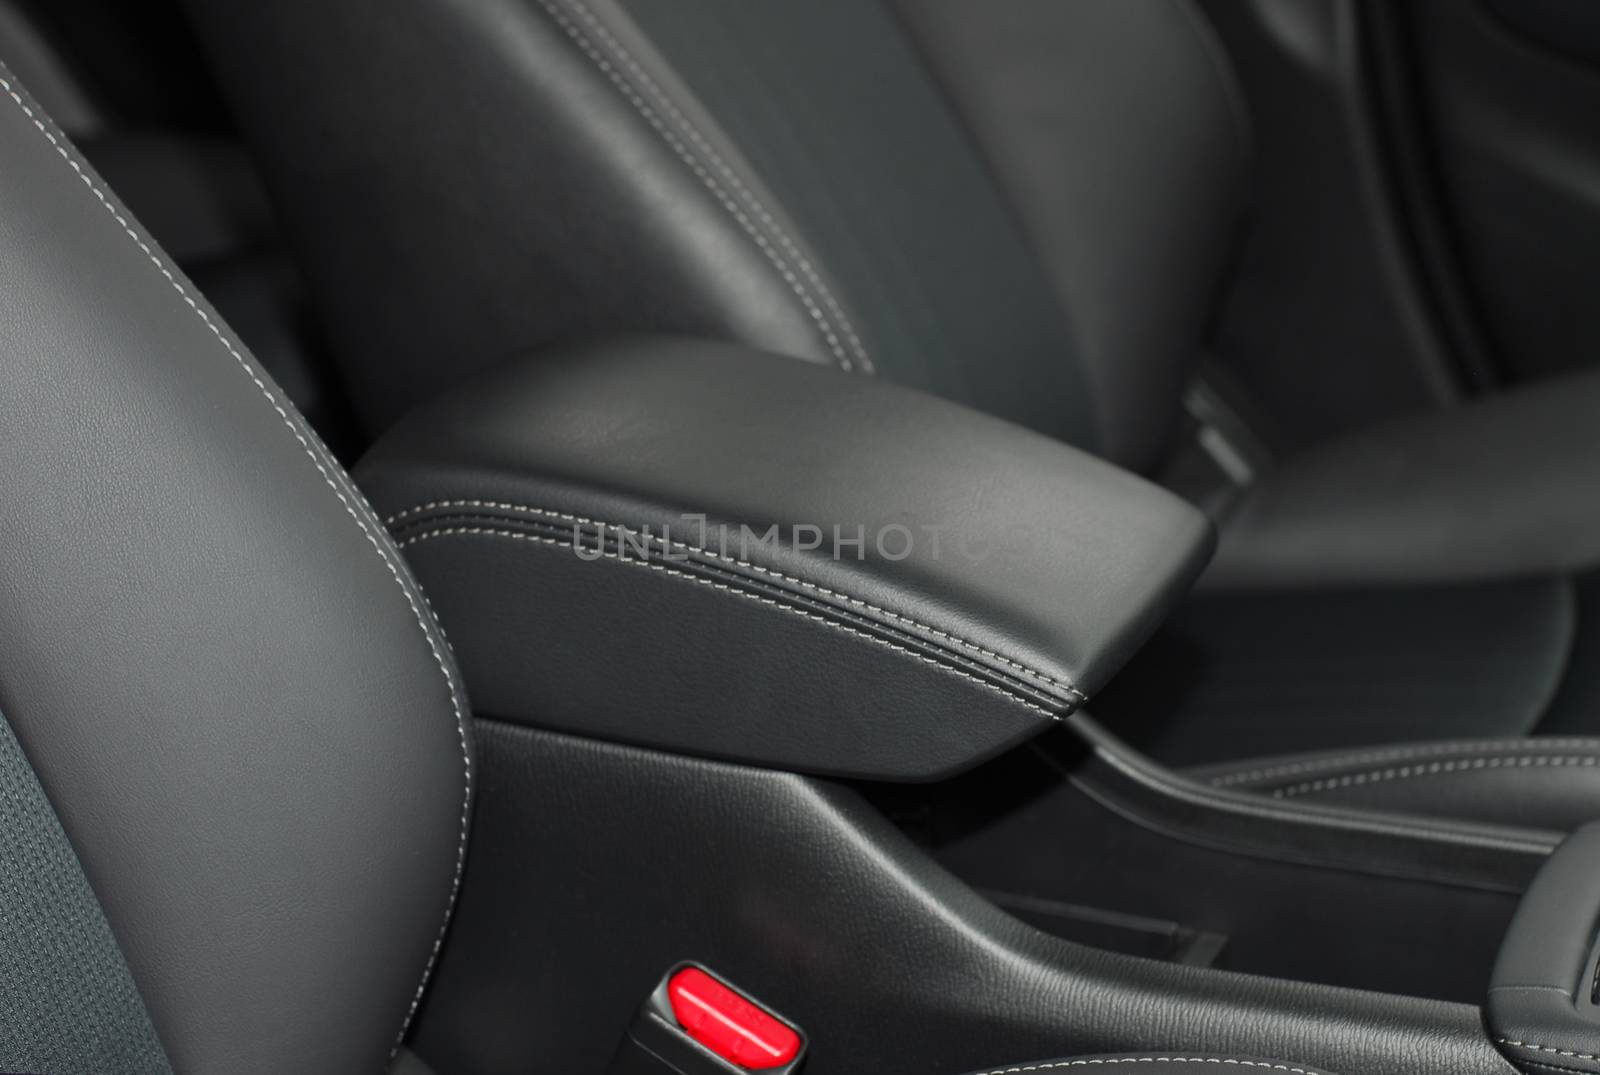 armrest in the luxury passenger car between the front seats by aselsa